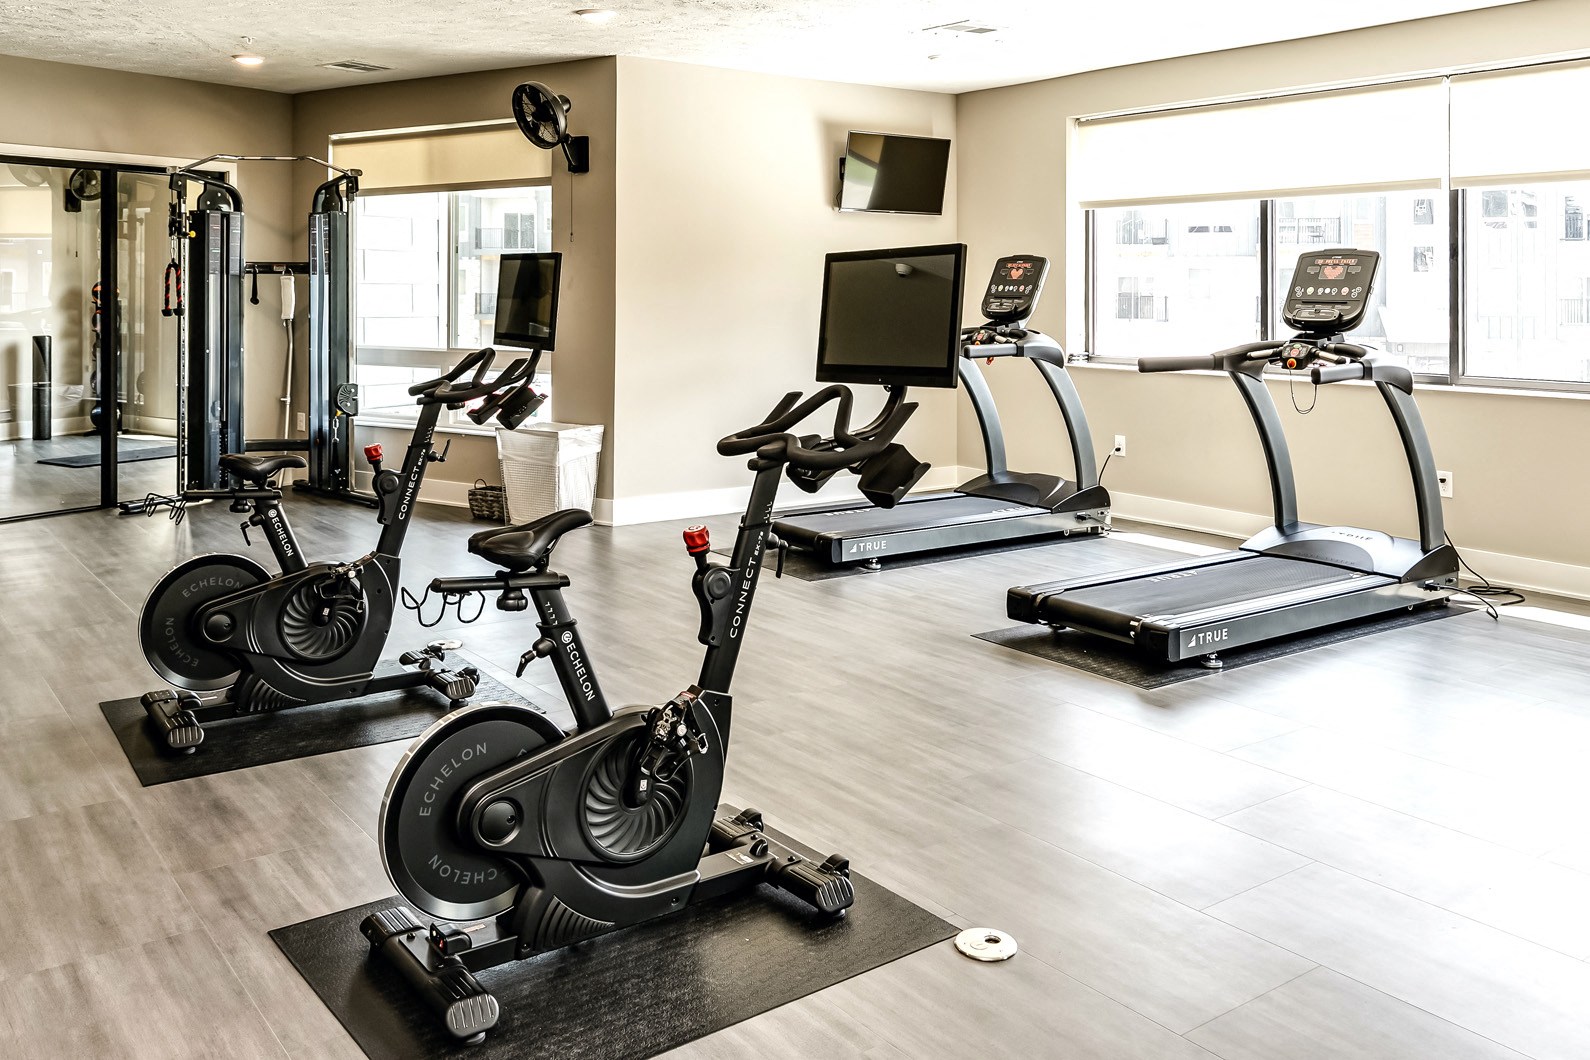 State-of-the-art fitness center at AXIS apartments in Papillion, NE